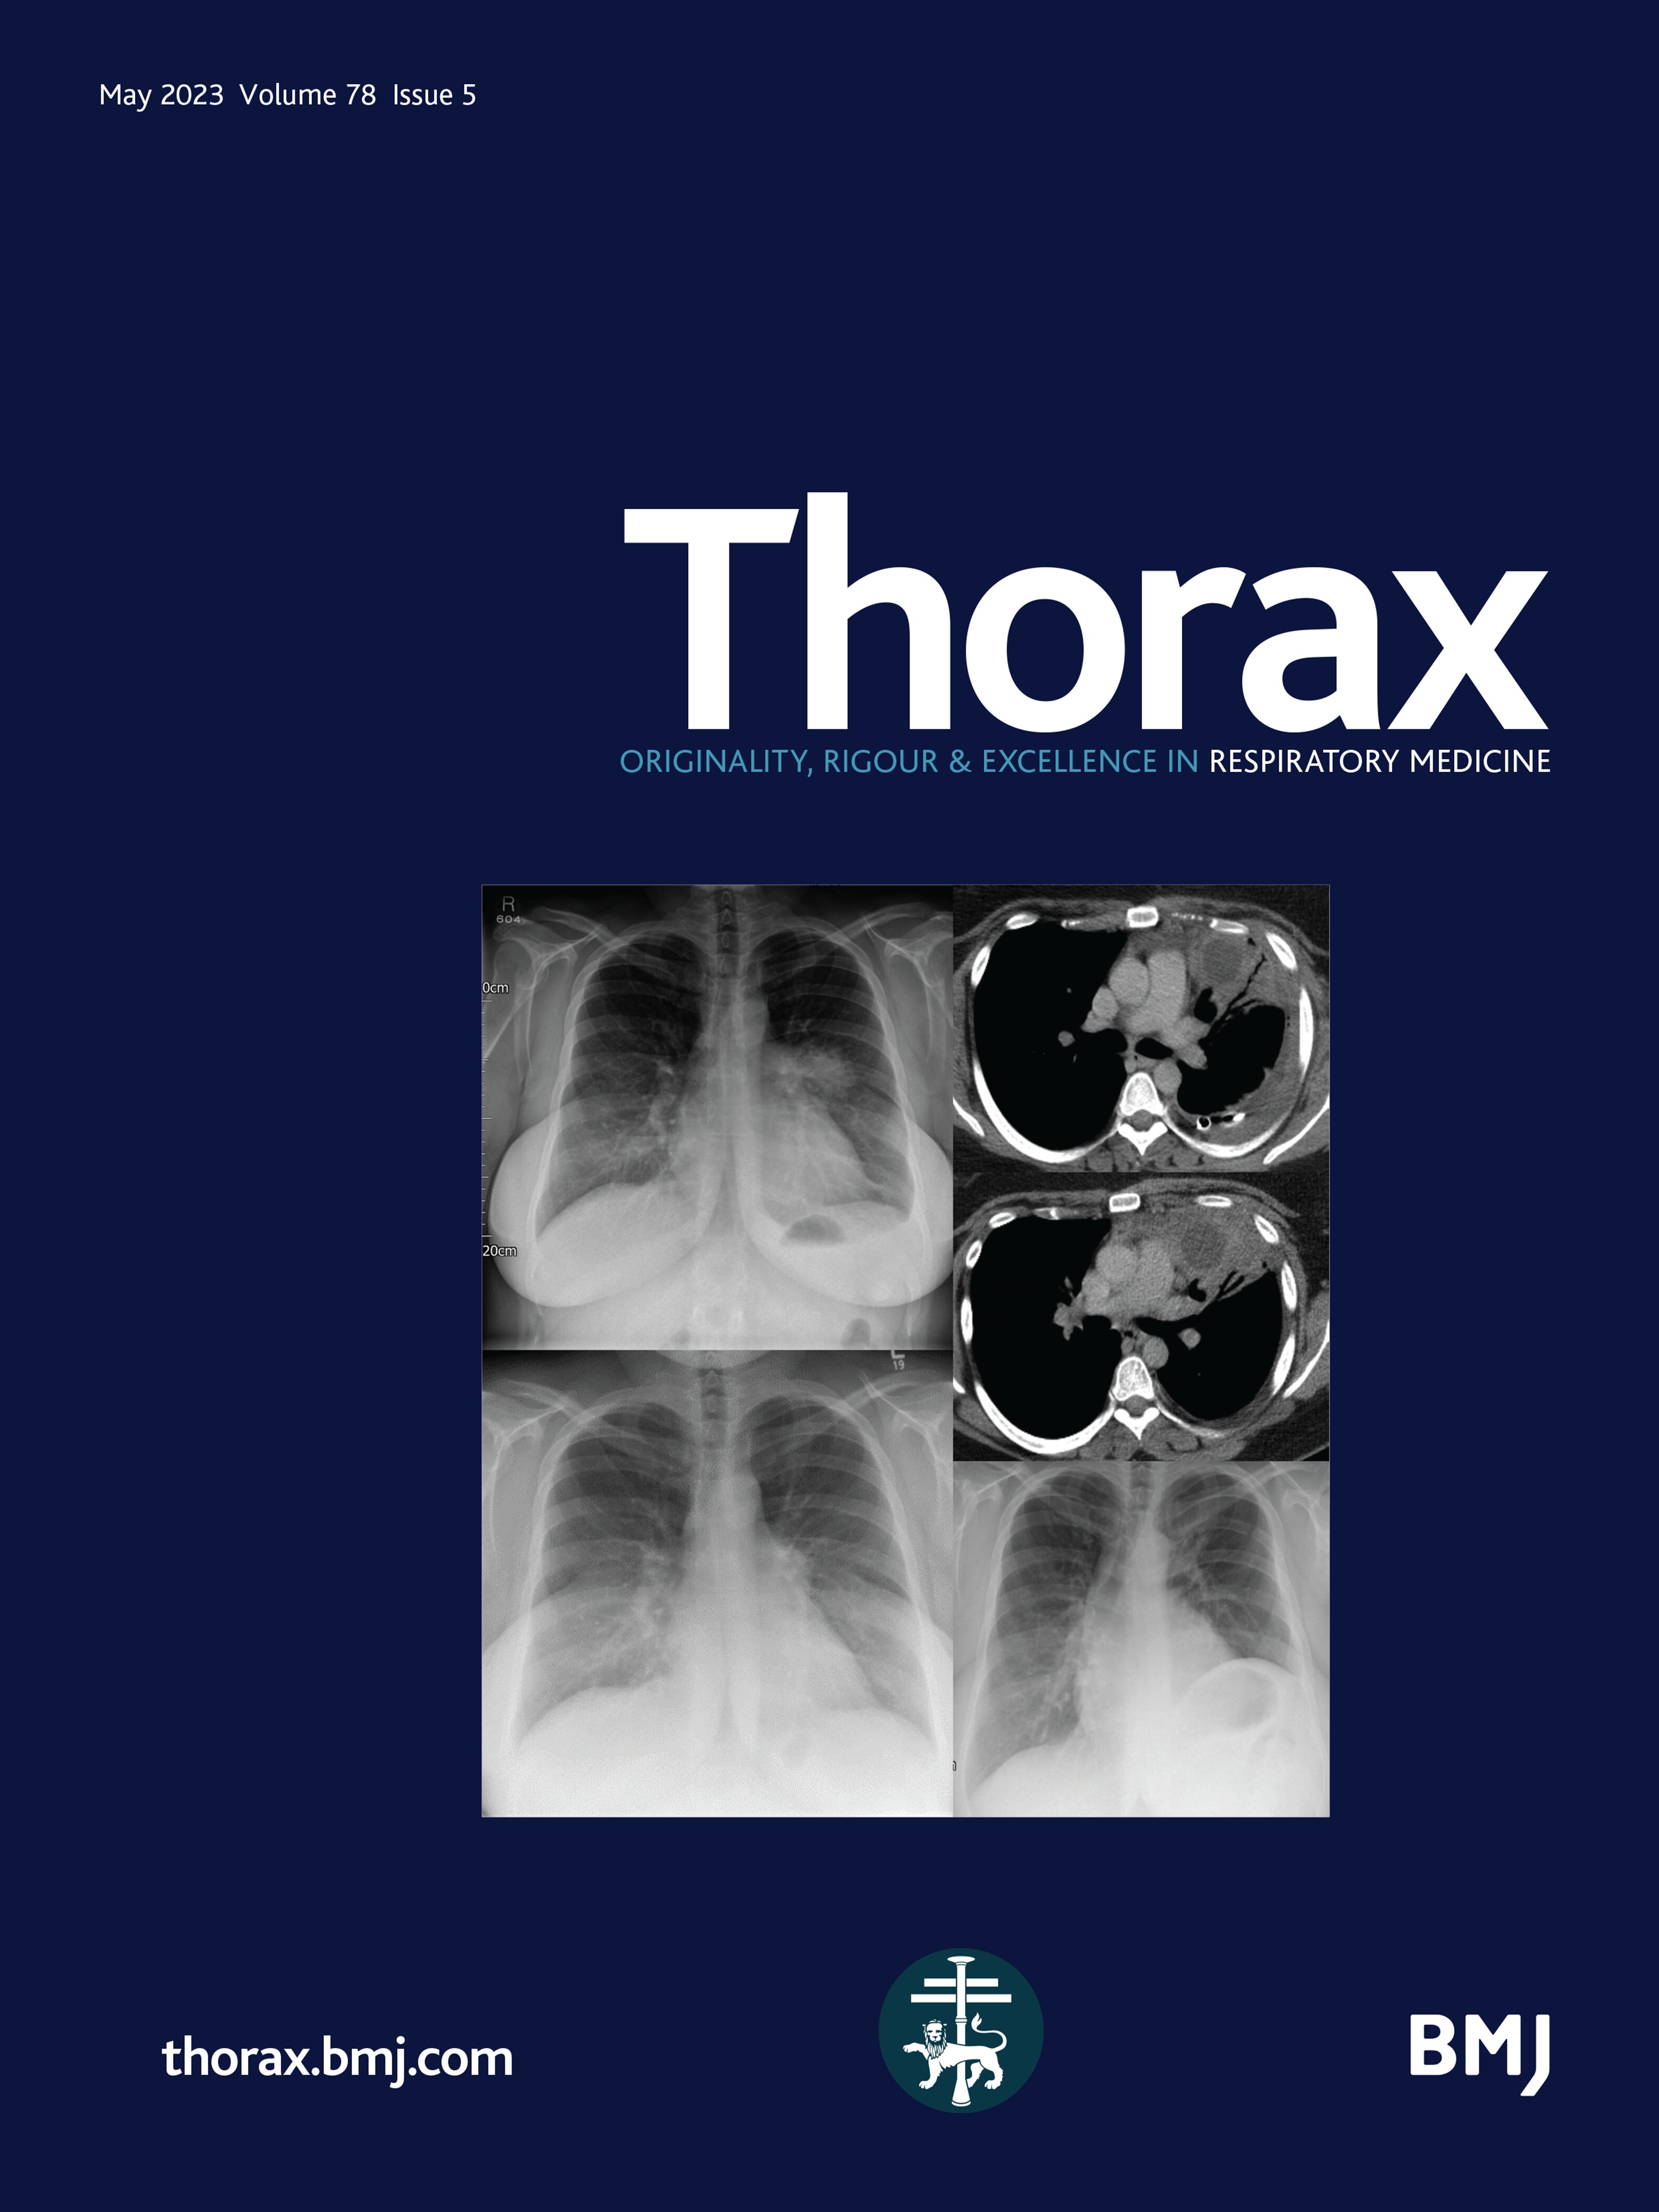 Ultra-low-dose CT versus chest X-ray for patients suspected of pulmonary disease at the emergency department: a multicentre randomised clinical trial